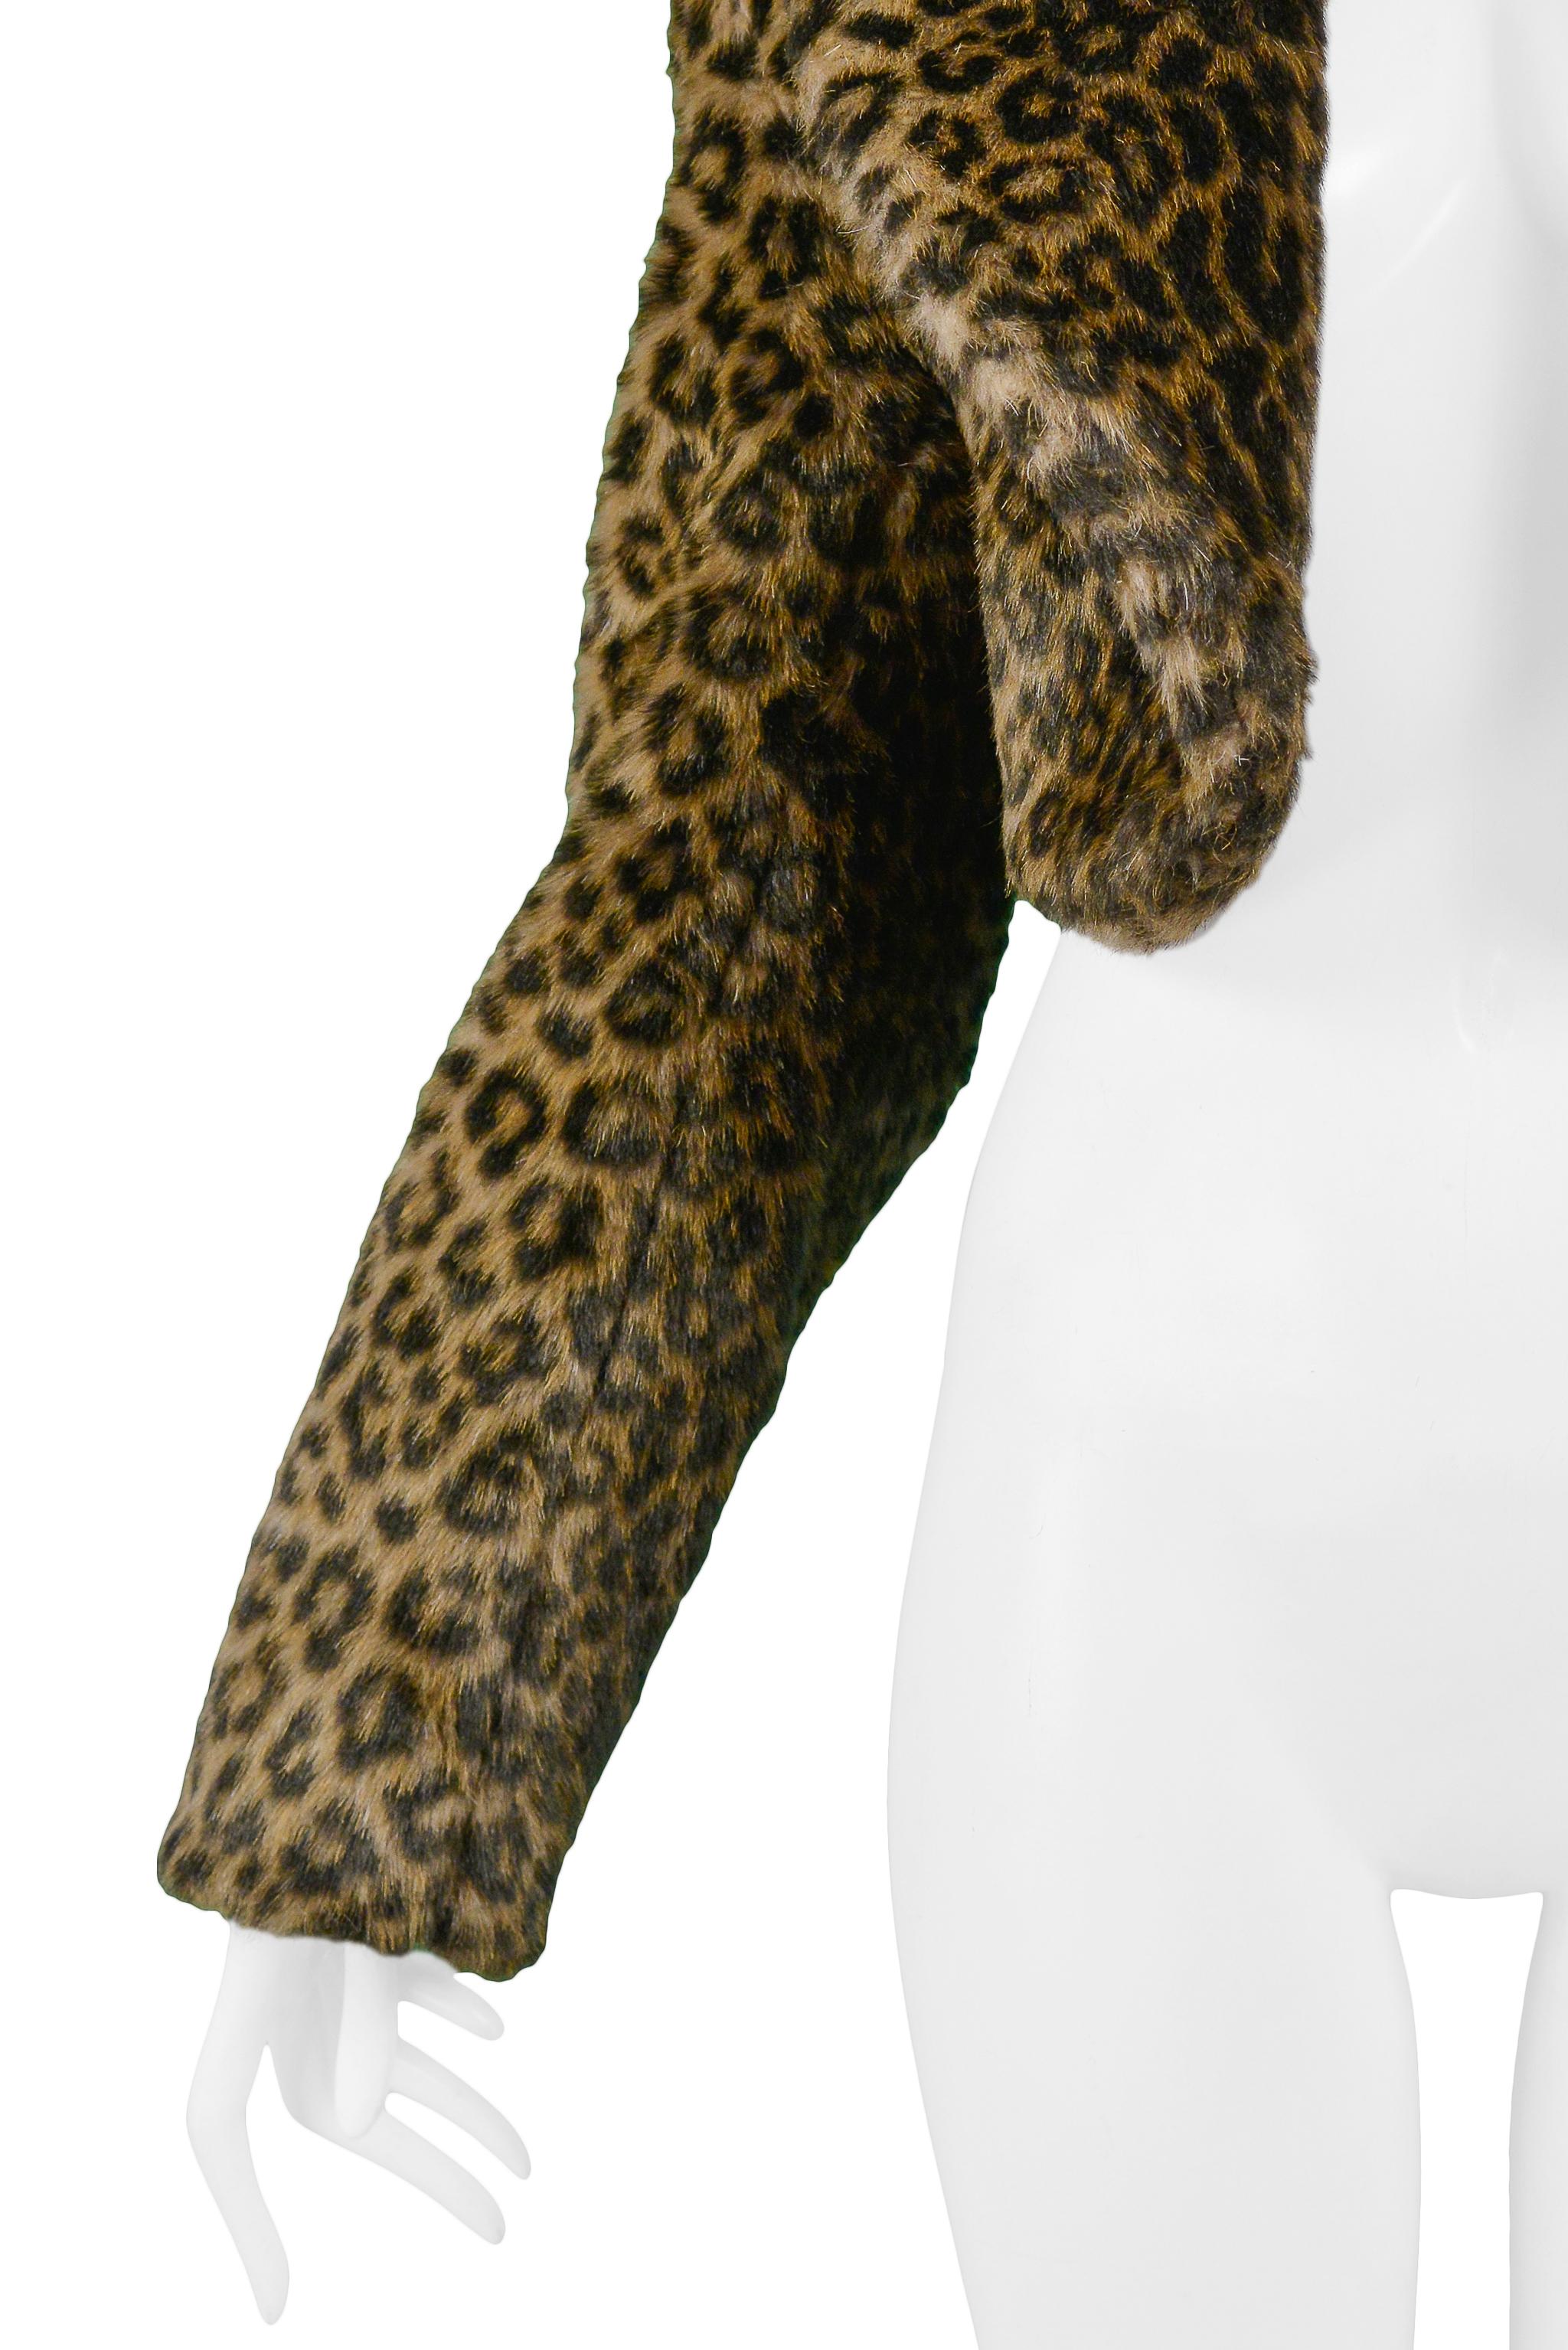 Iconic Azzedine Alaia Faux Leopard Cropped Runway Jacket 1991 In Excellent Condition In Los Angeles, CA